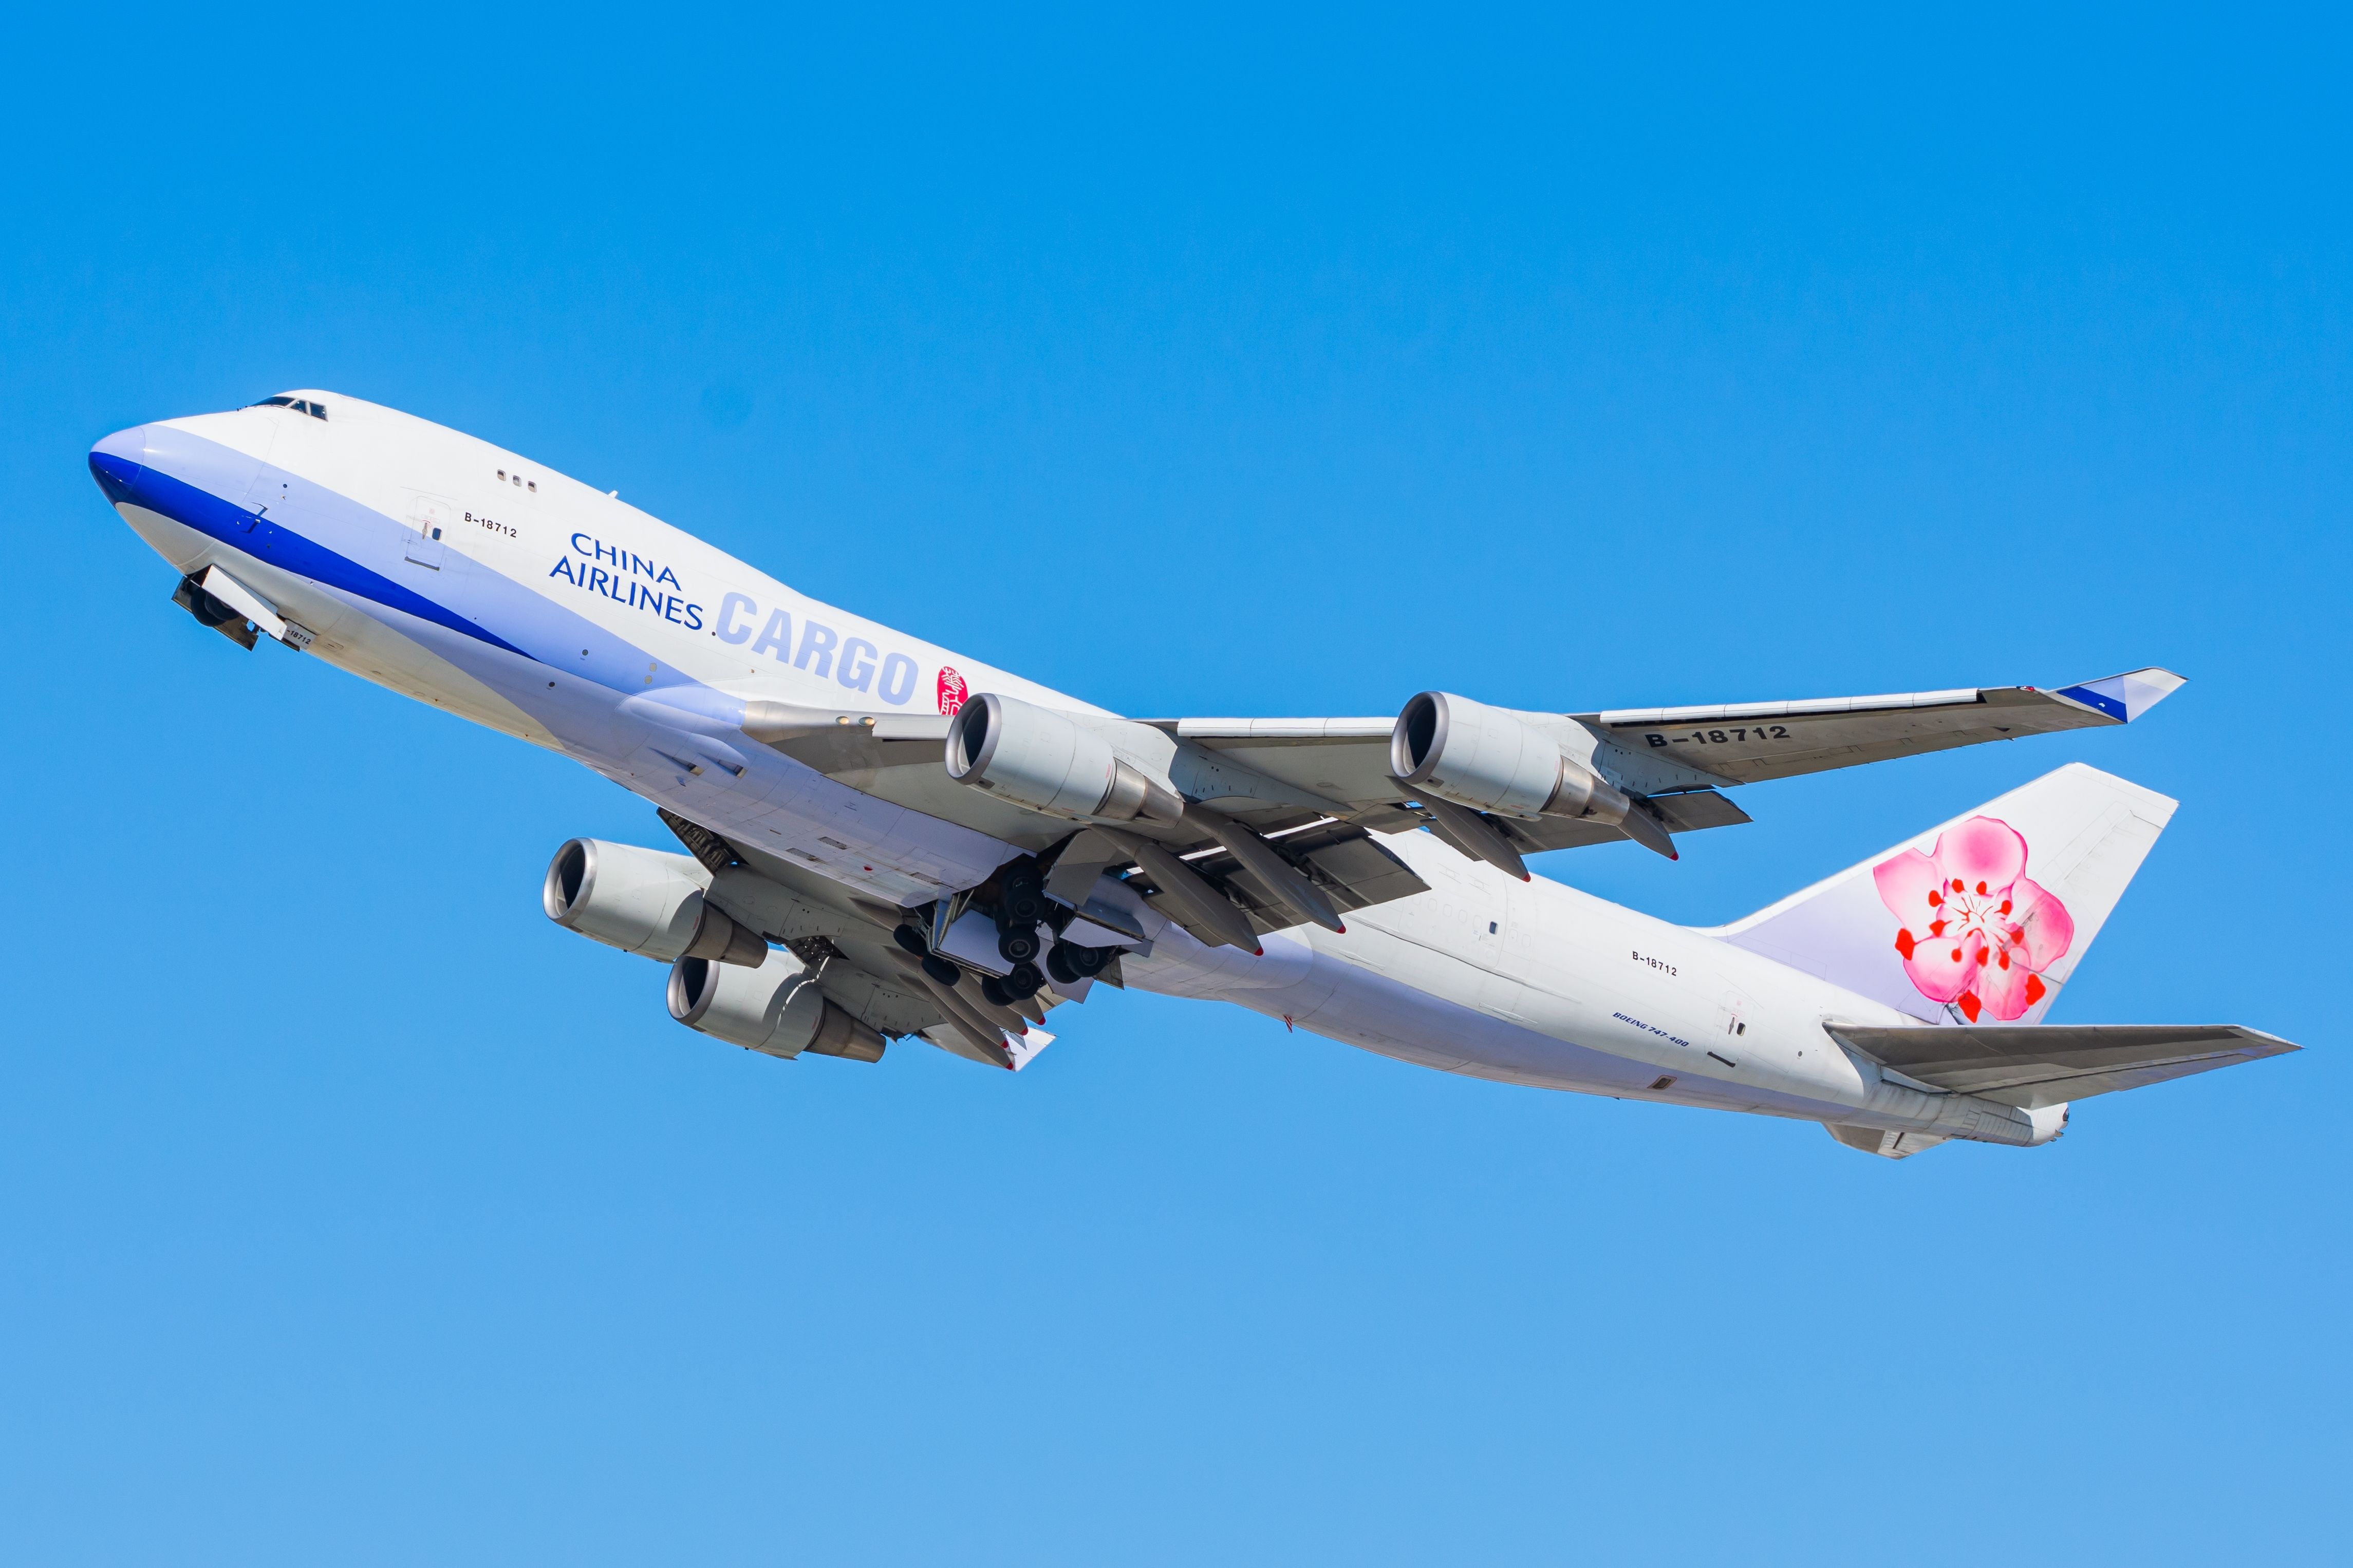 China Airlines Boeing 747F